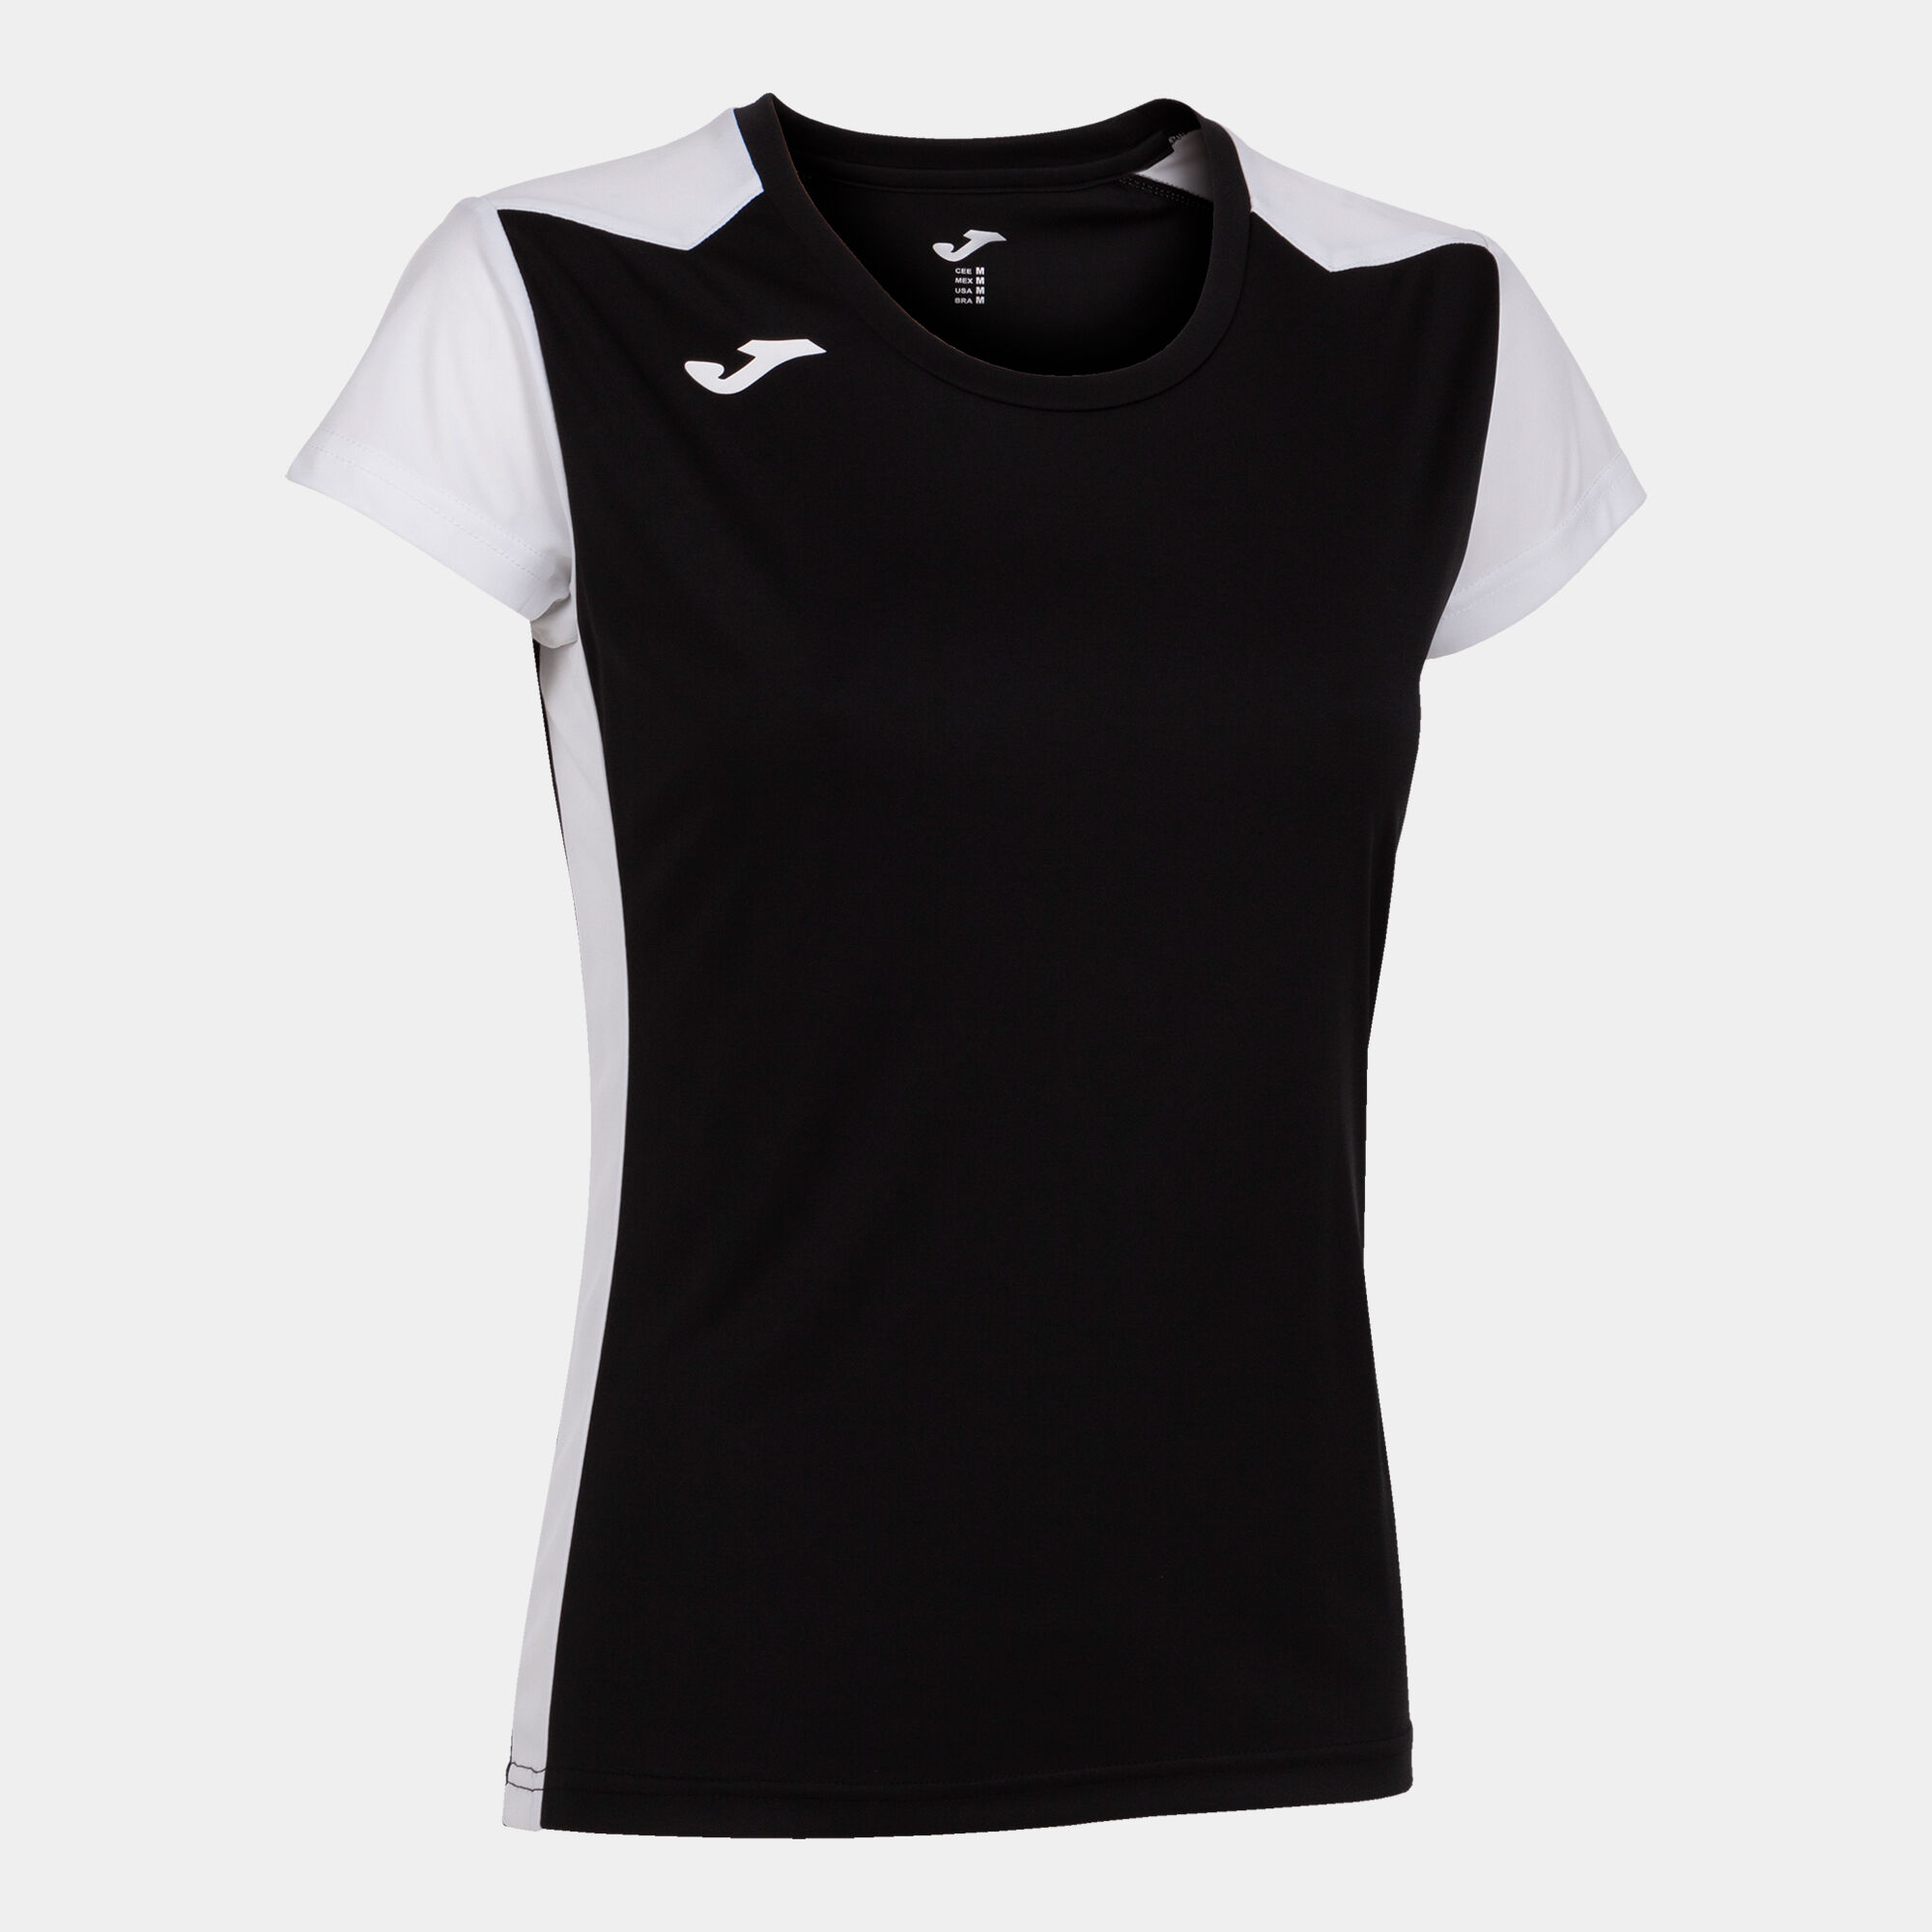 MAILLOT MANCHES COURTES FEMME RECORD II NOIR BLANC